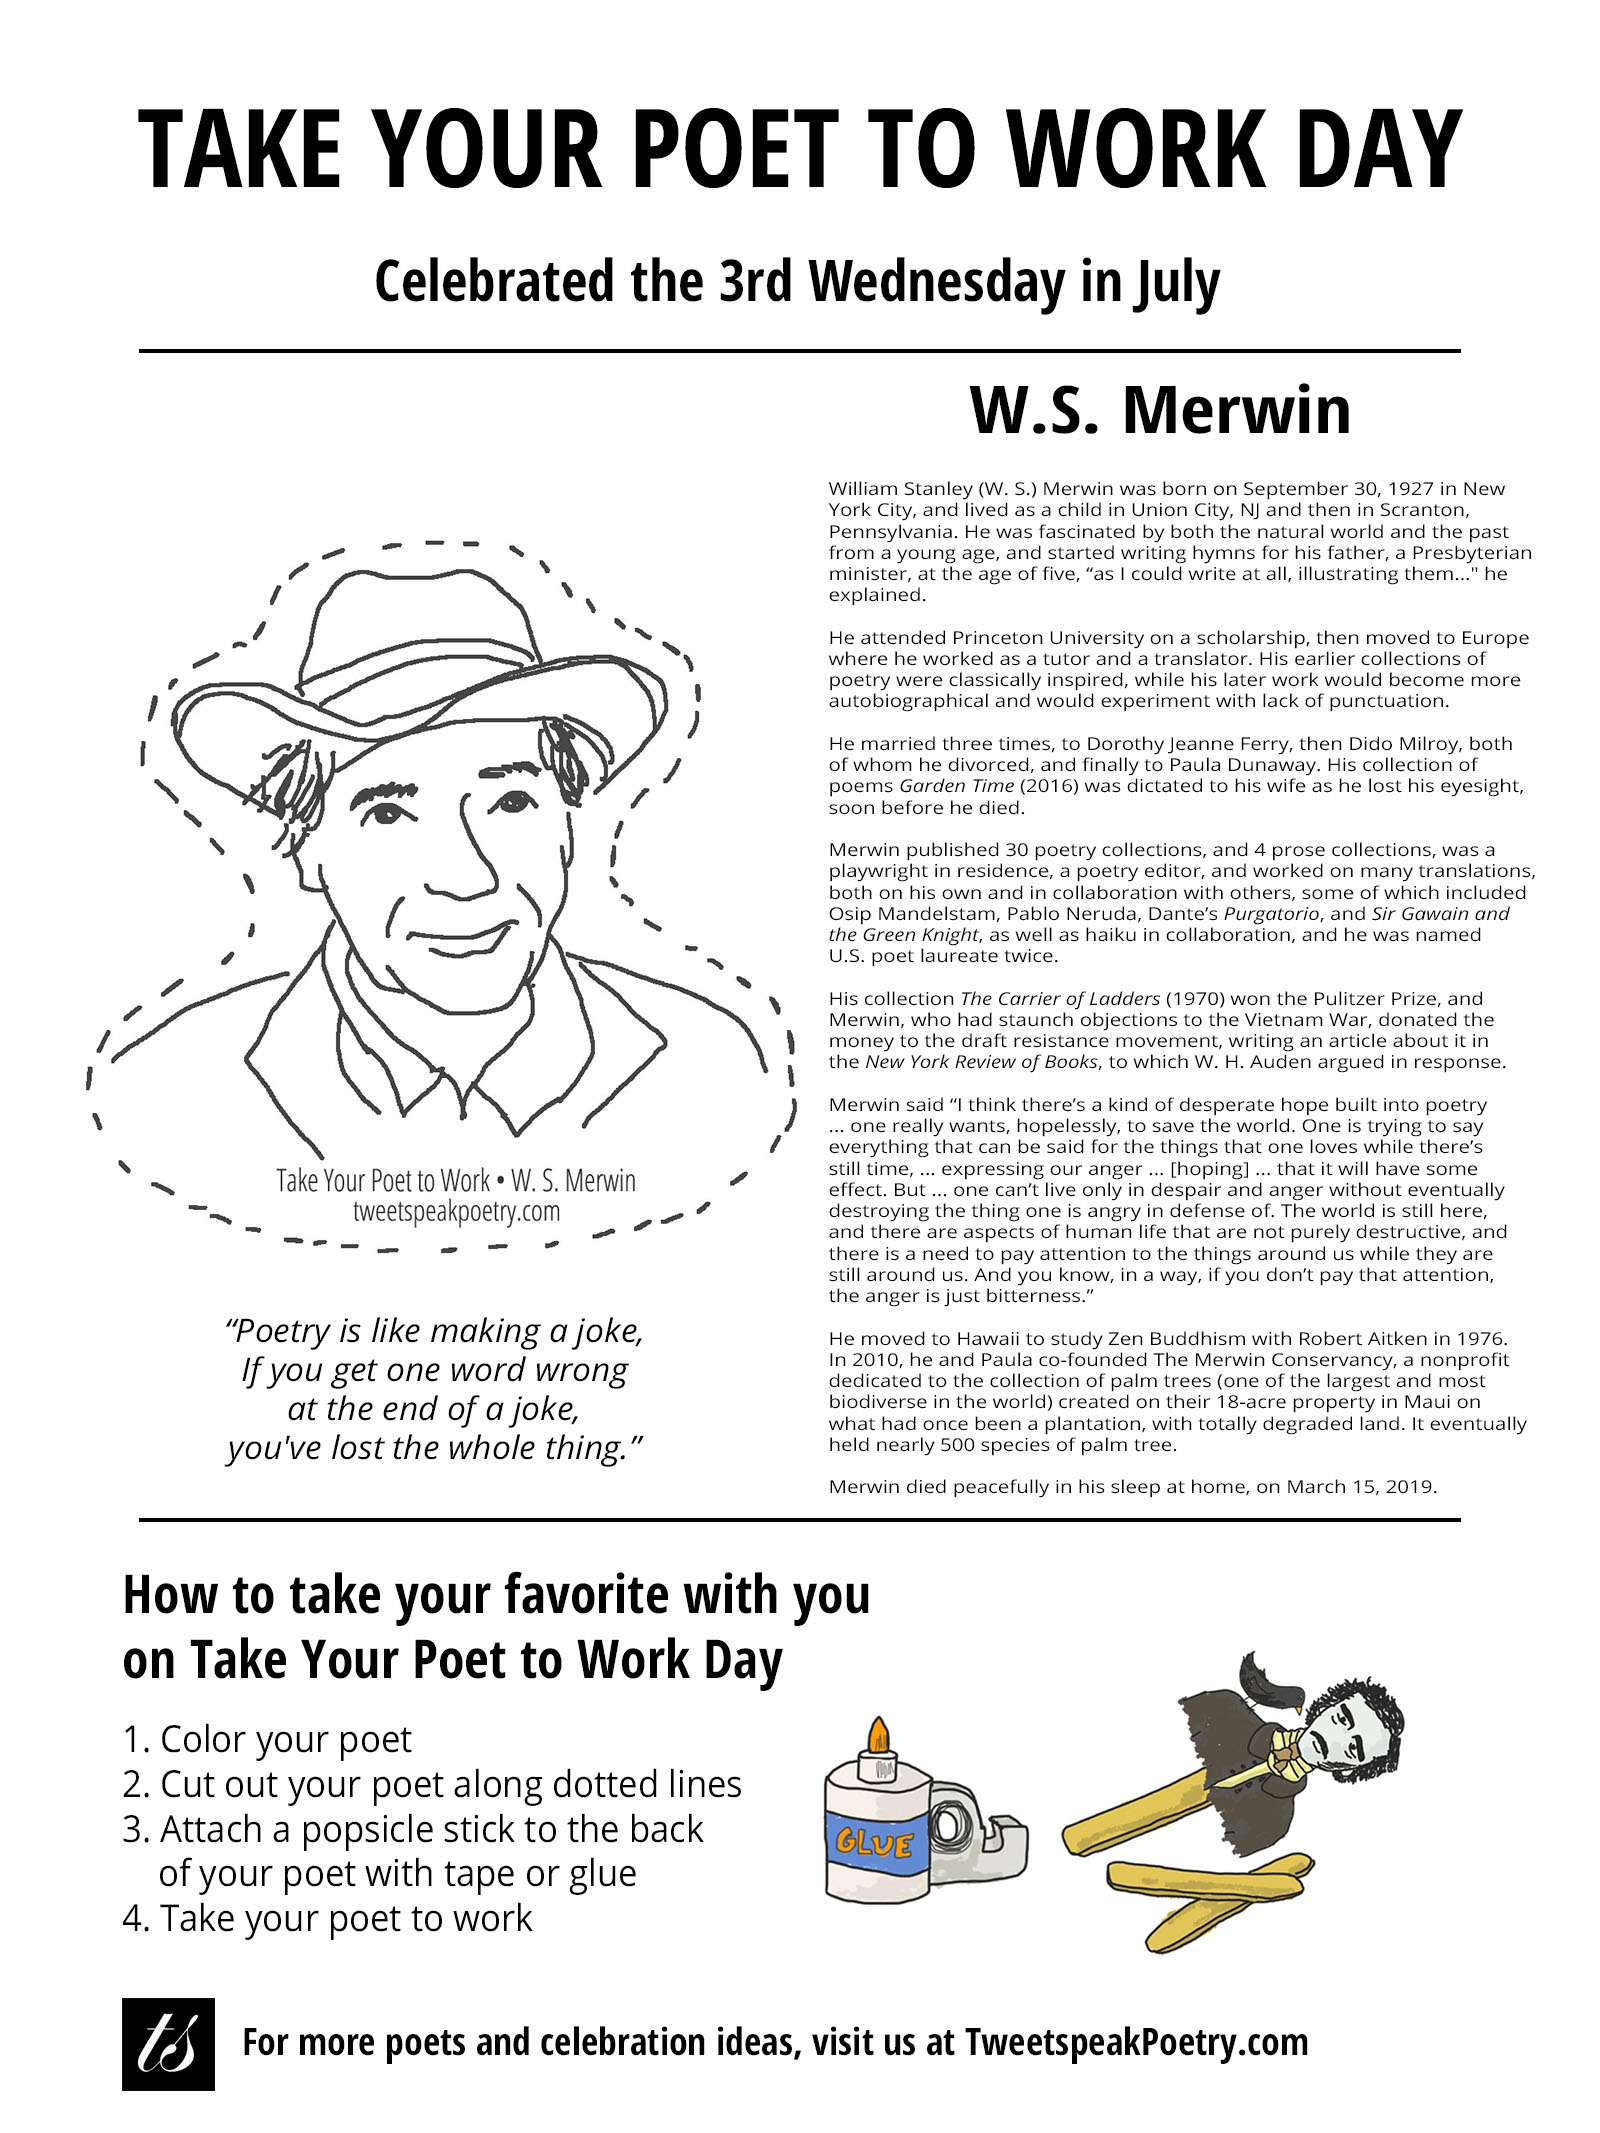 W.S. Merwin - Take Your Poet to Work Printable